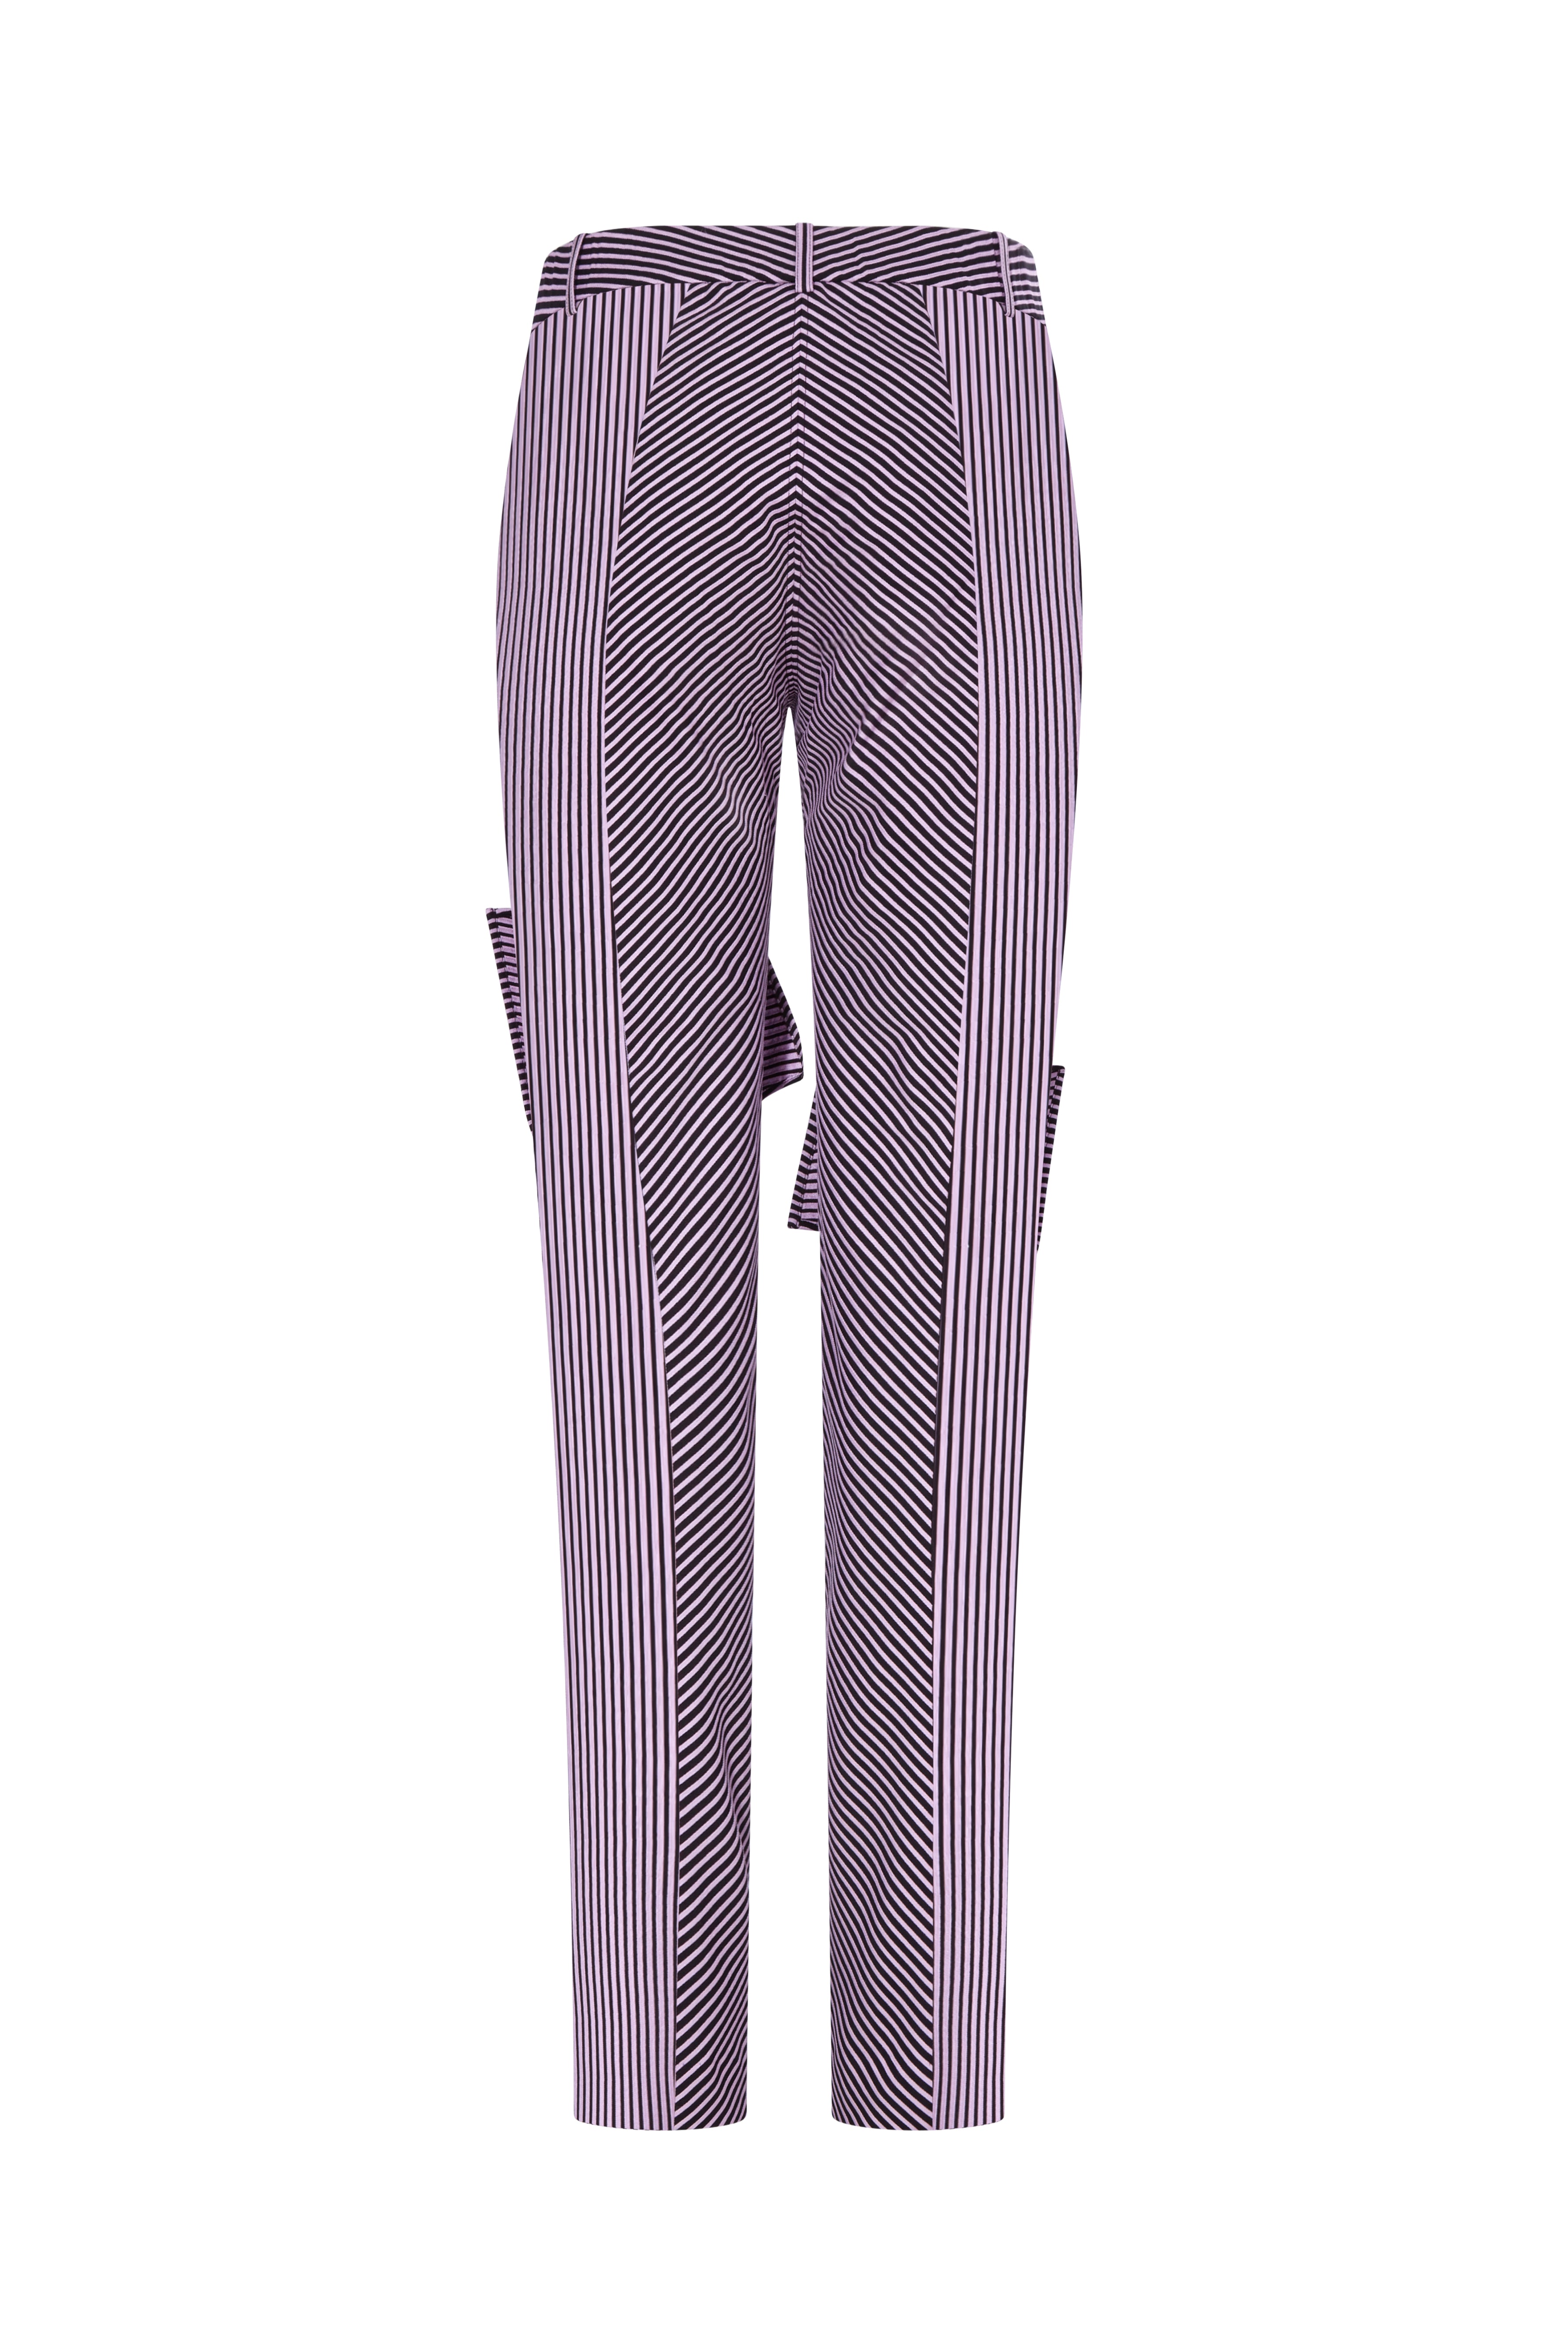 ( Size 00-14) Stretch Purple and Black Striped Dance Pants - Arianne Elmy